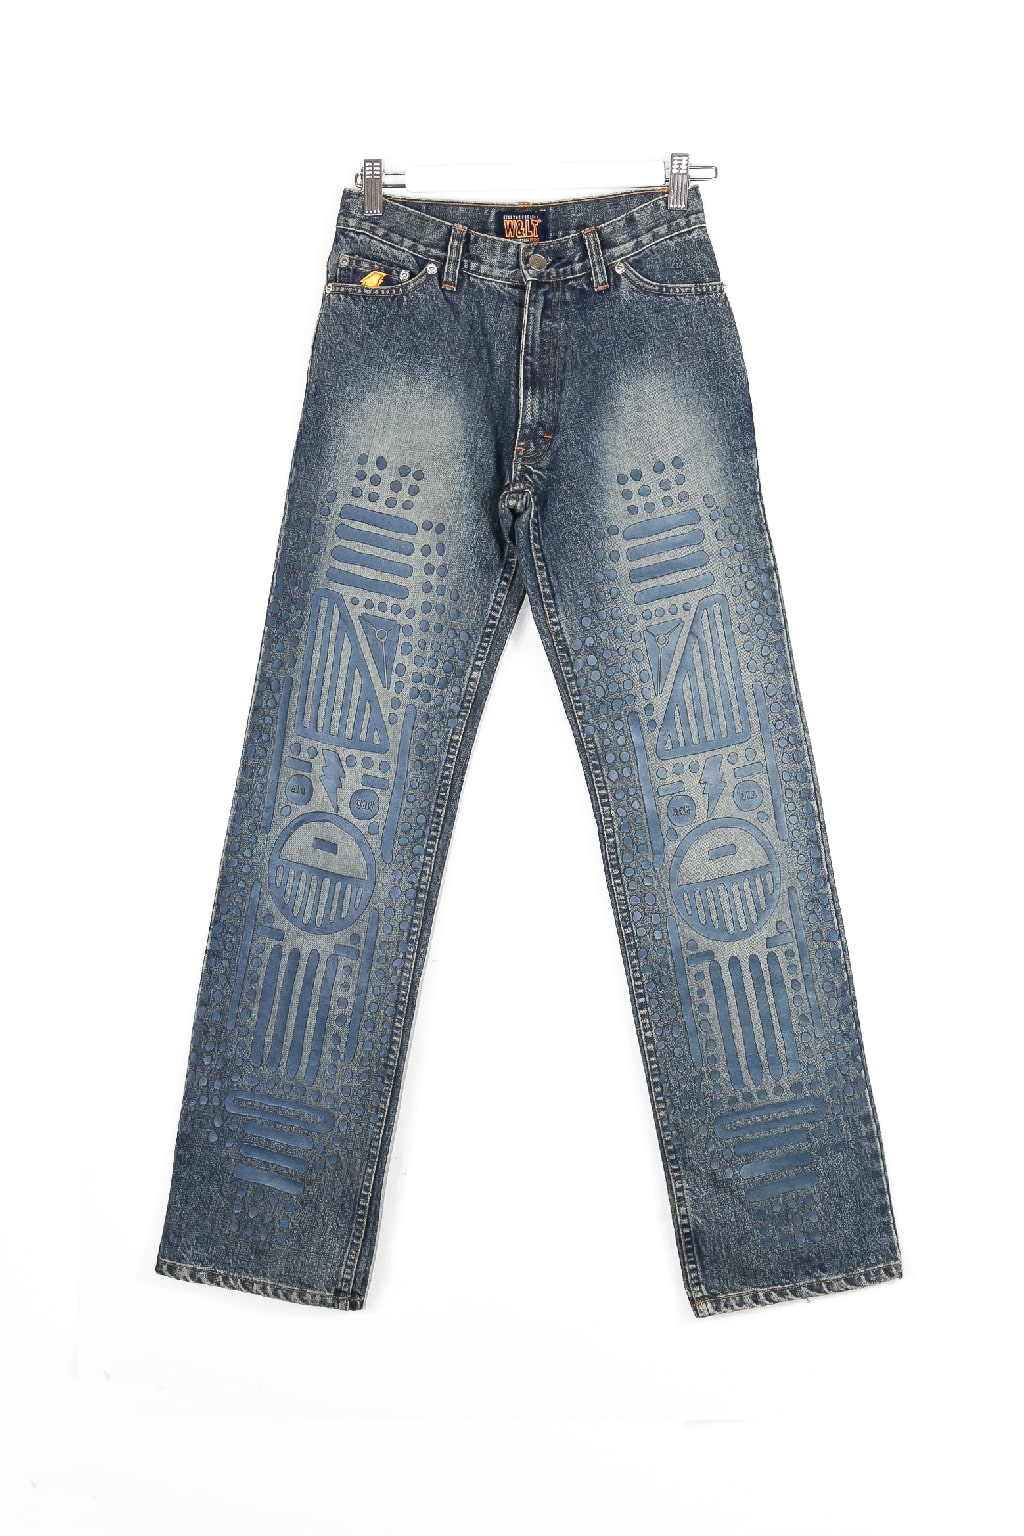 Vintage Wild and lethal trash jeans W25/7